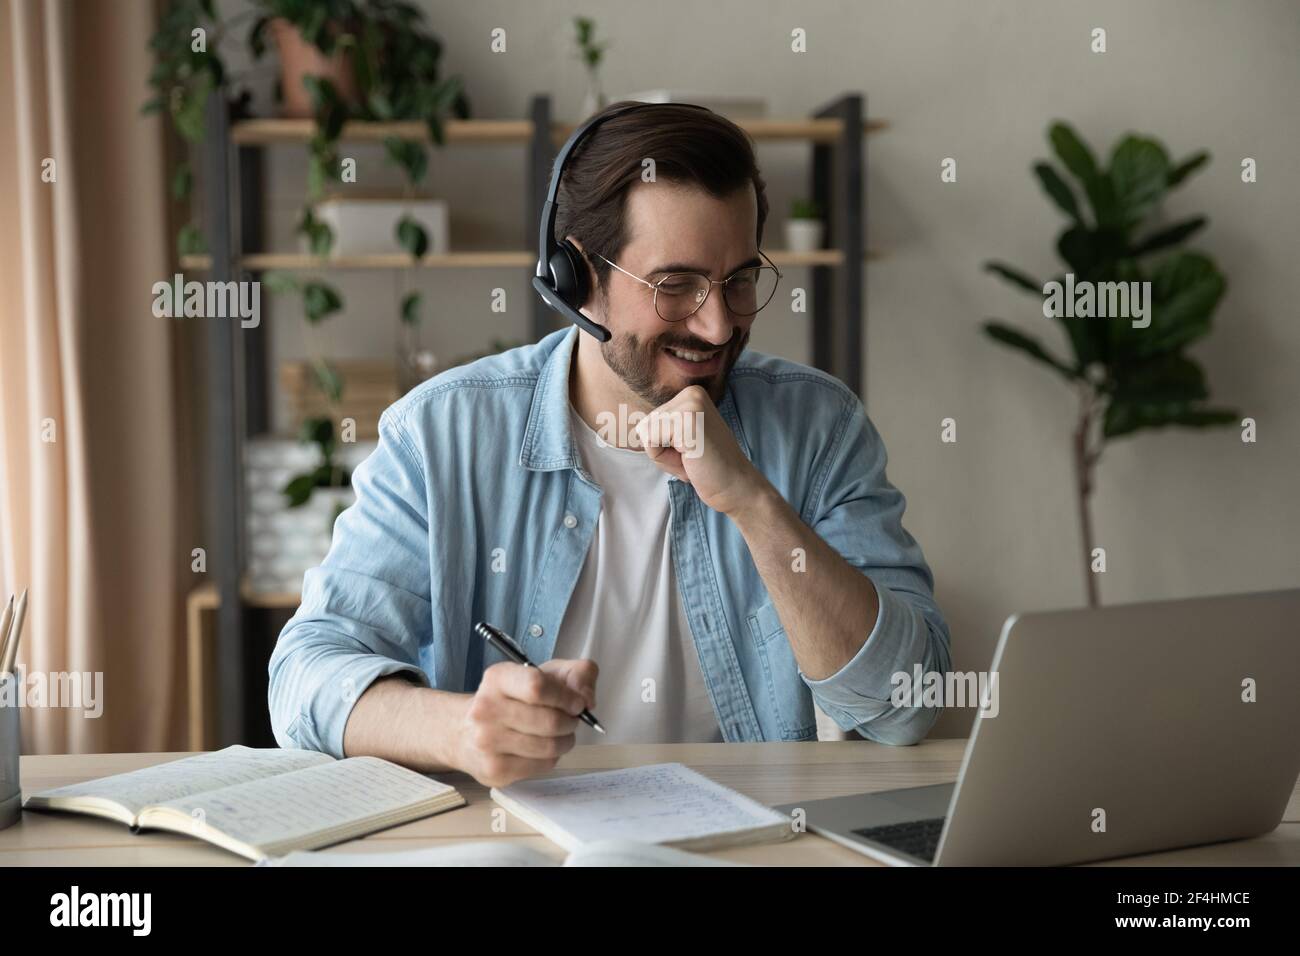 Close up smiling man wearing headphones involved in online lesson Stock Photo